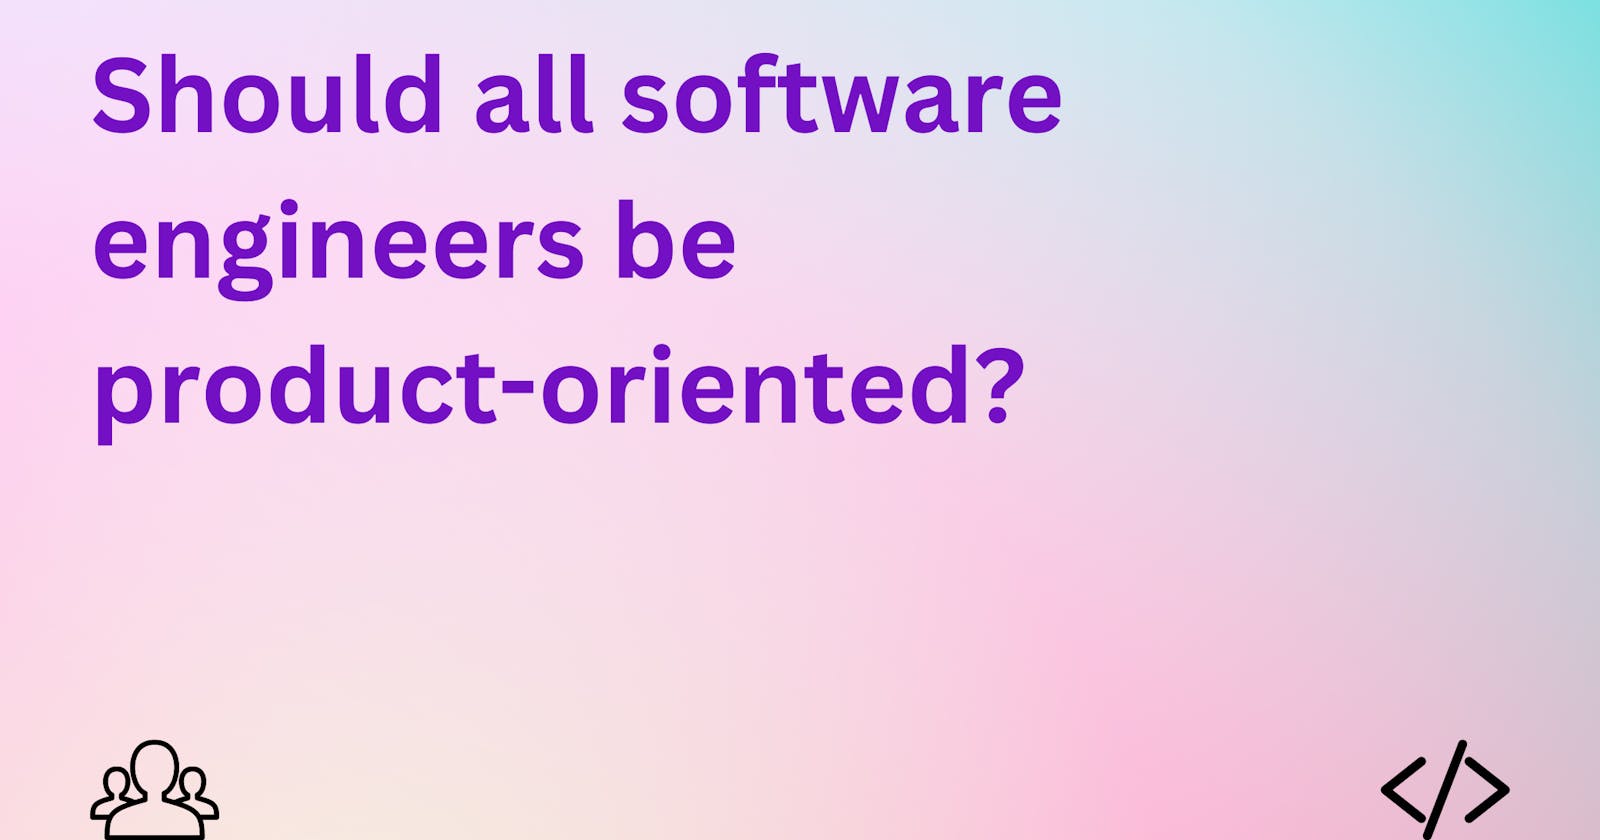 Should all software engineers be product-oriented?